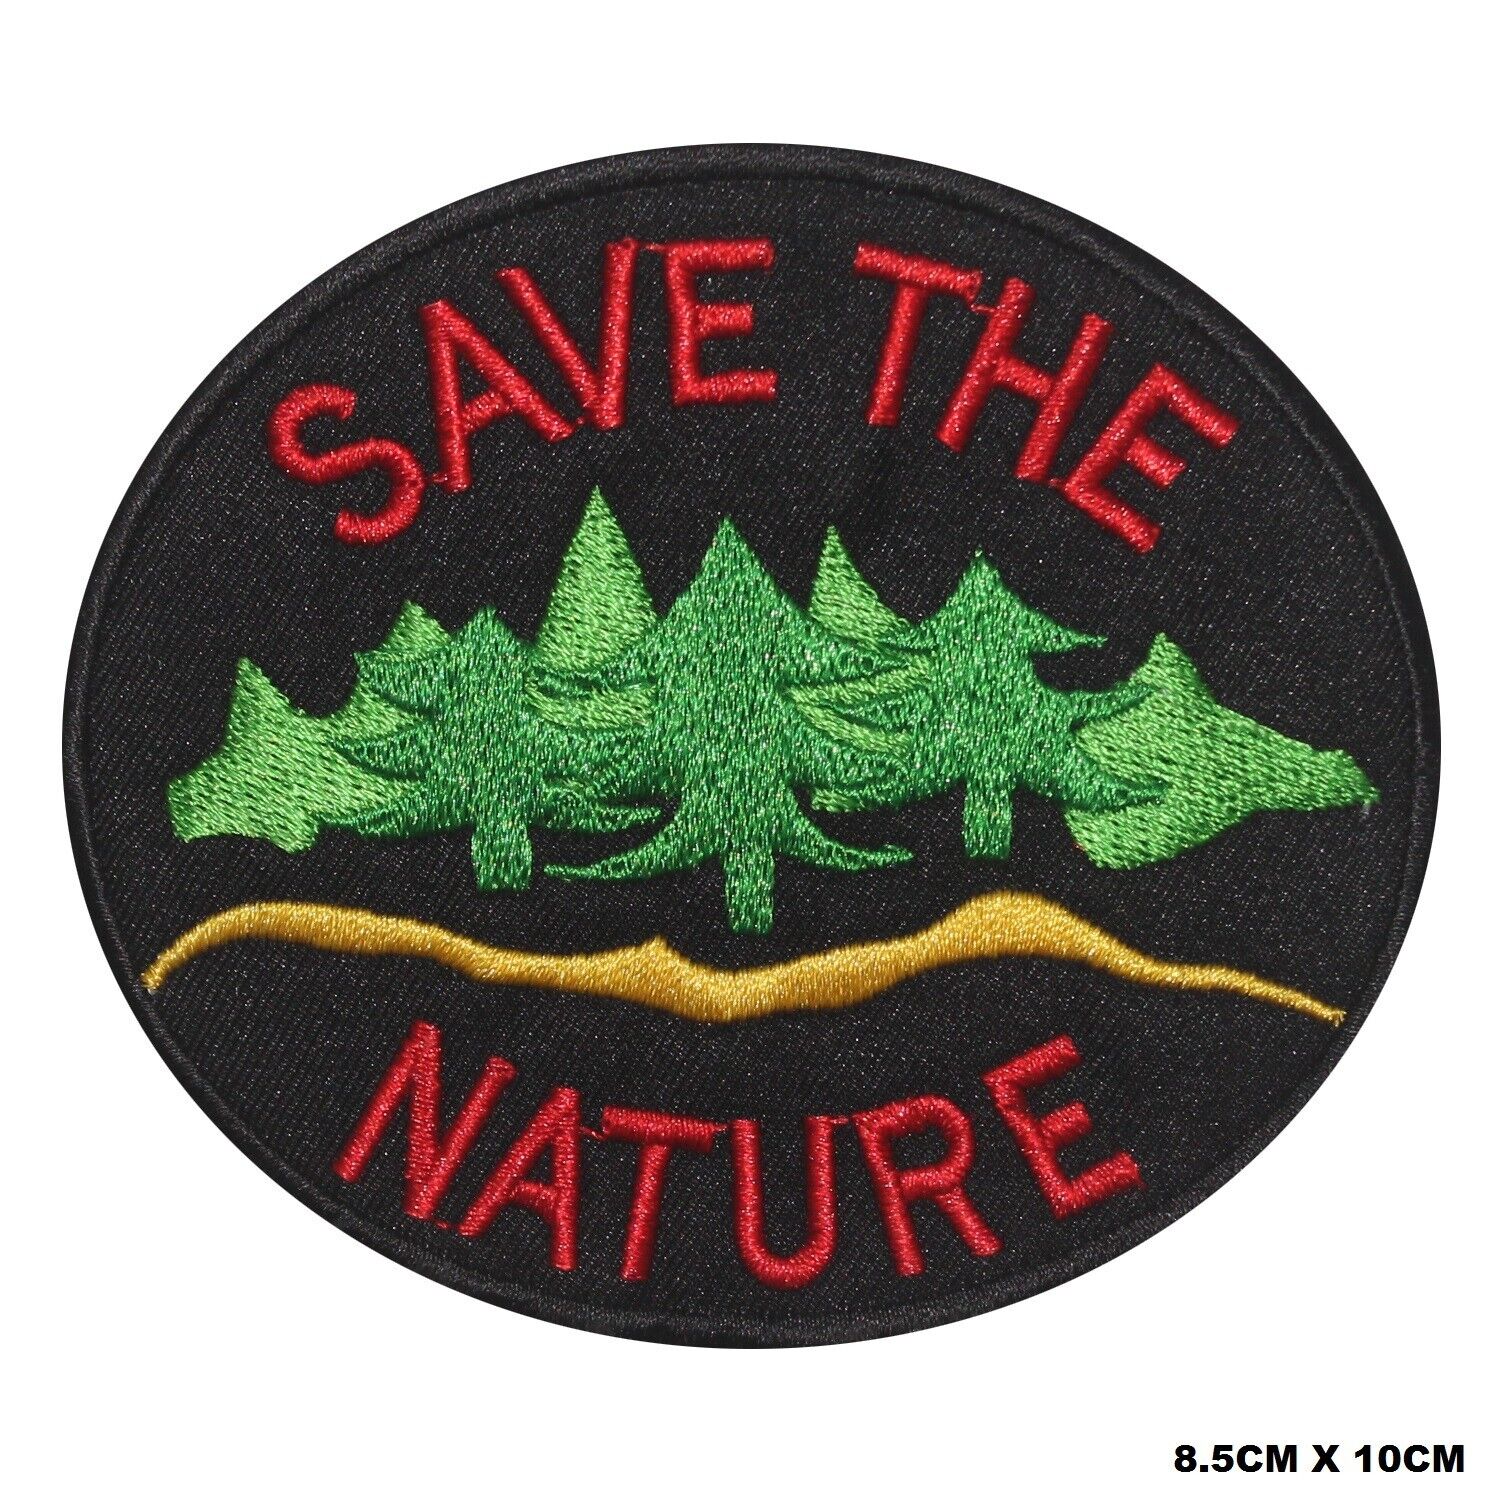 Save The Nature Logo Embroidered Patch Iron On/Sew On Patch Batch